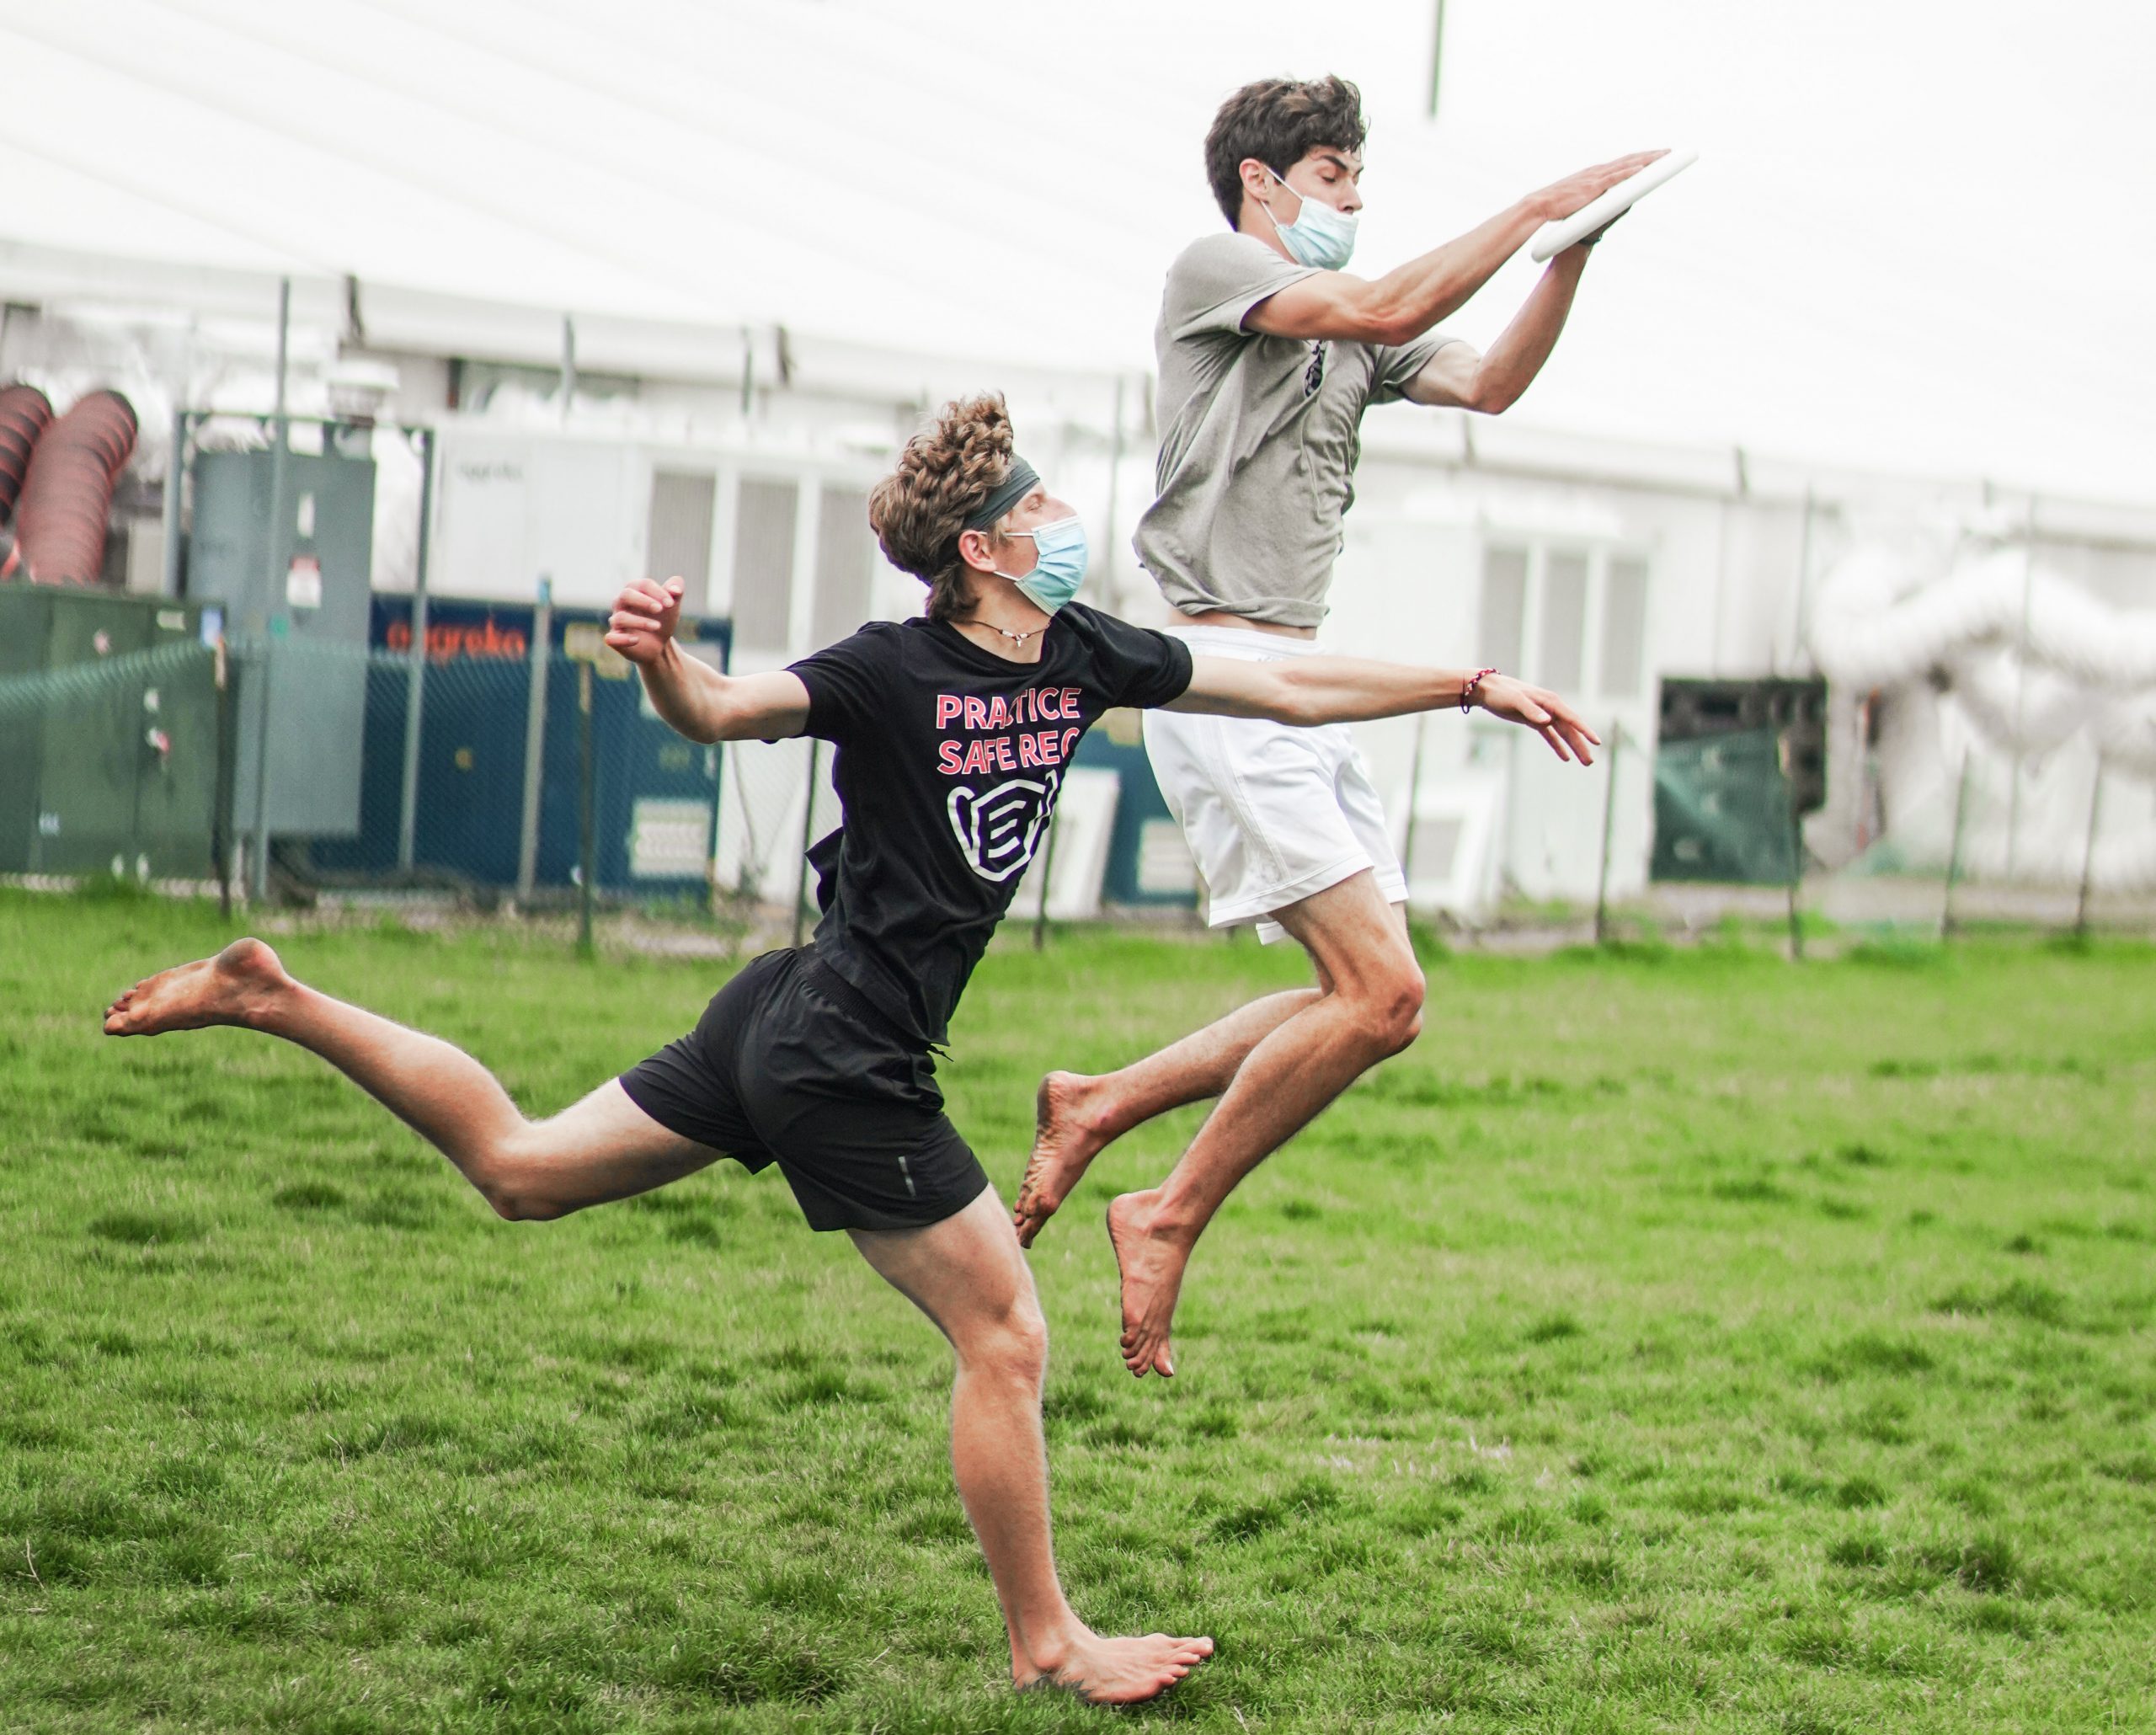 One student jumps in the air to catch a frisbee as another chases them.